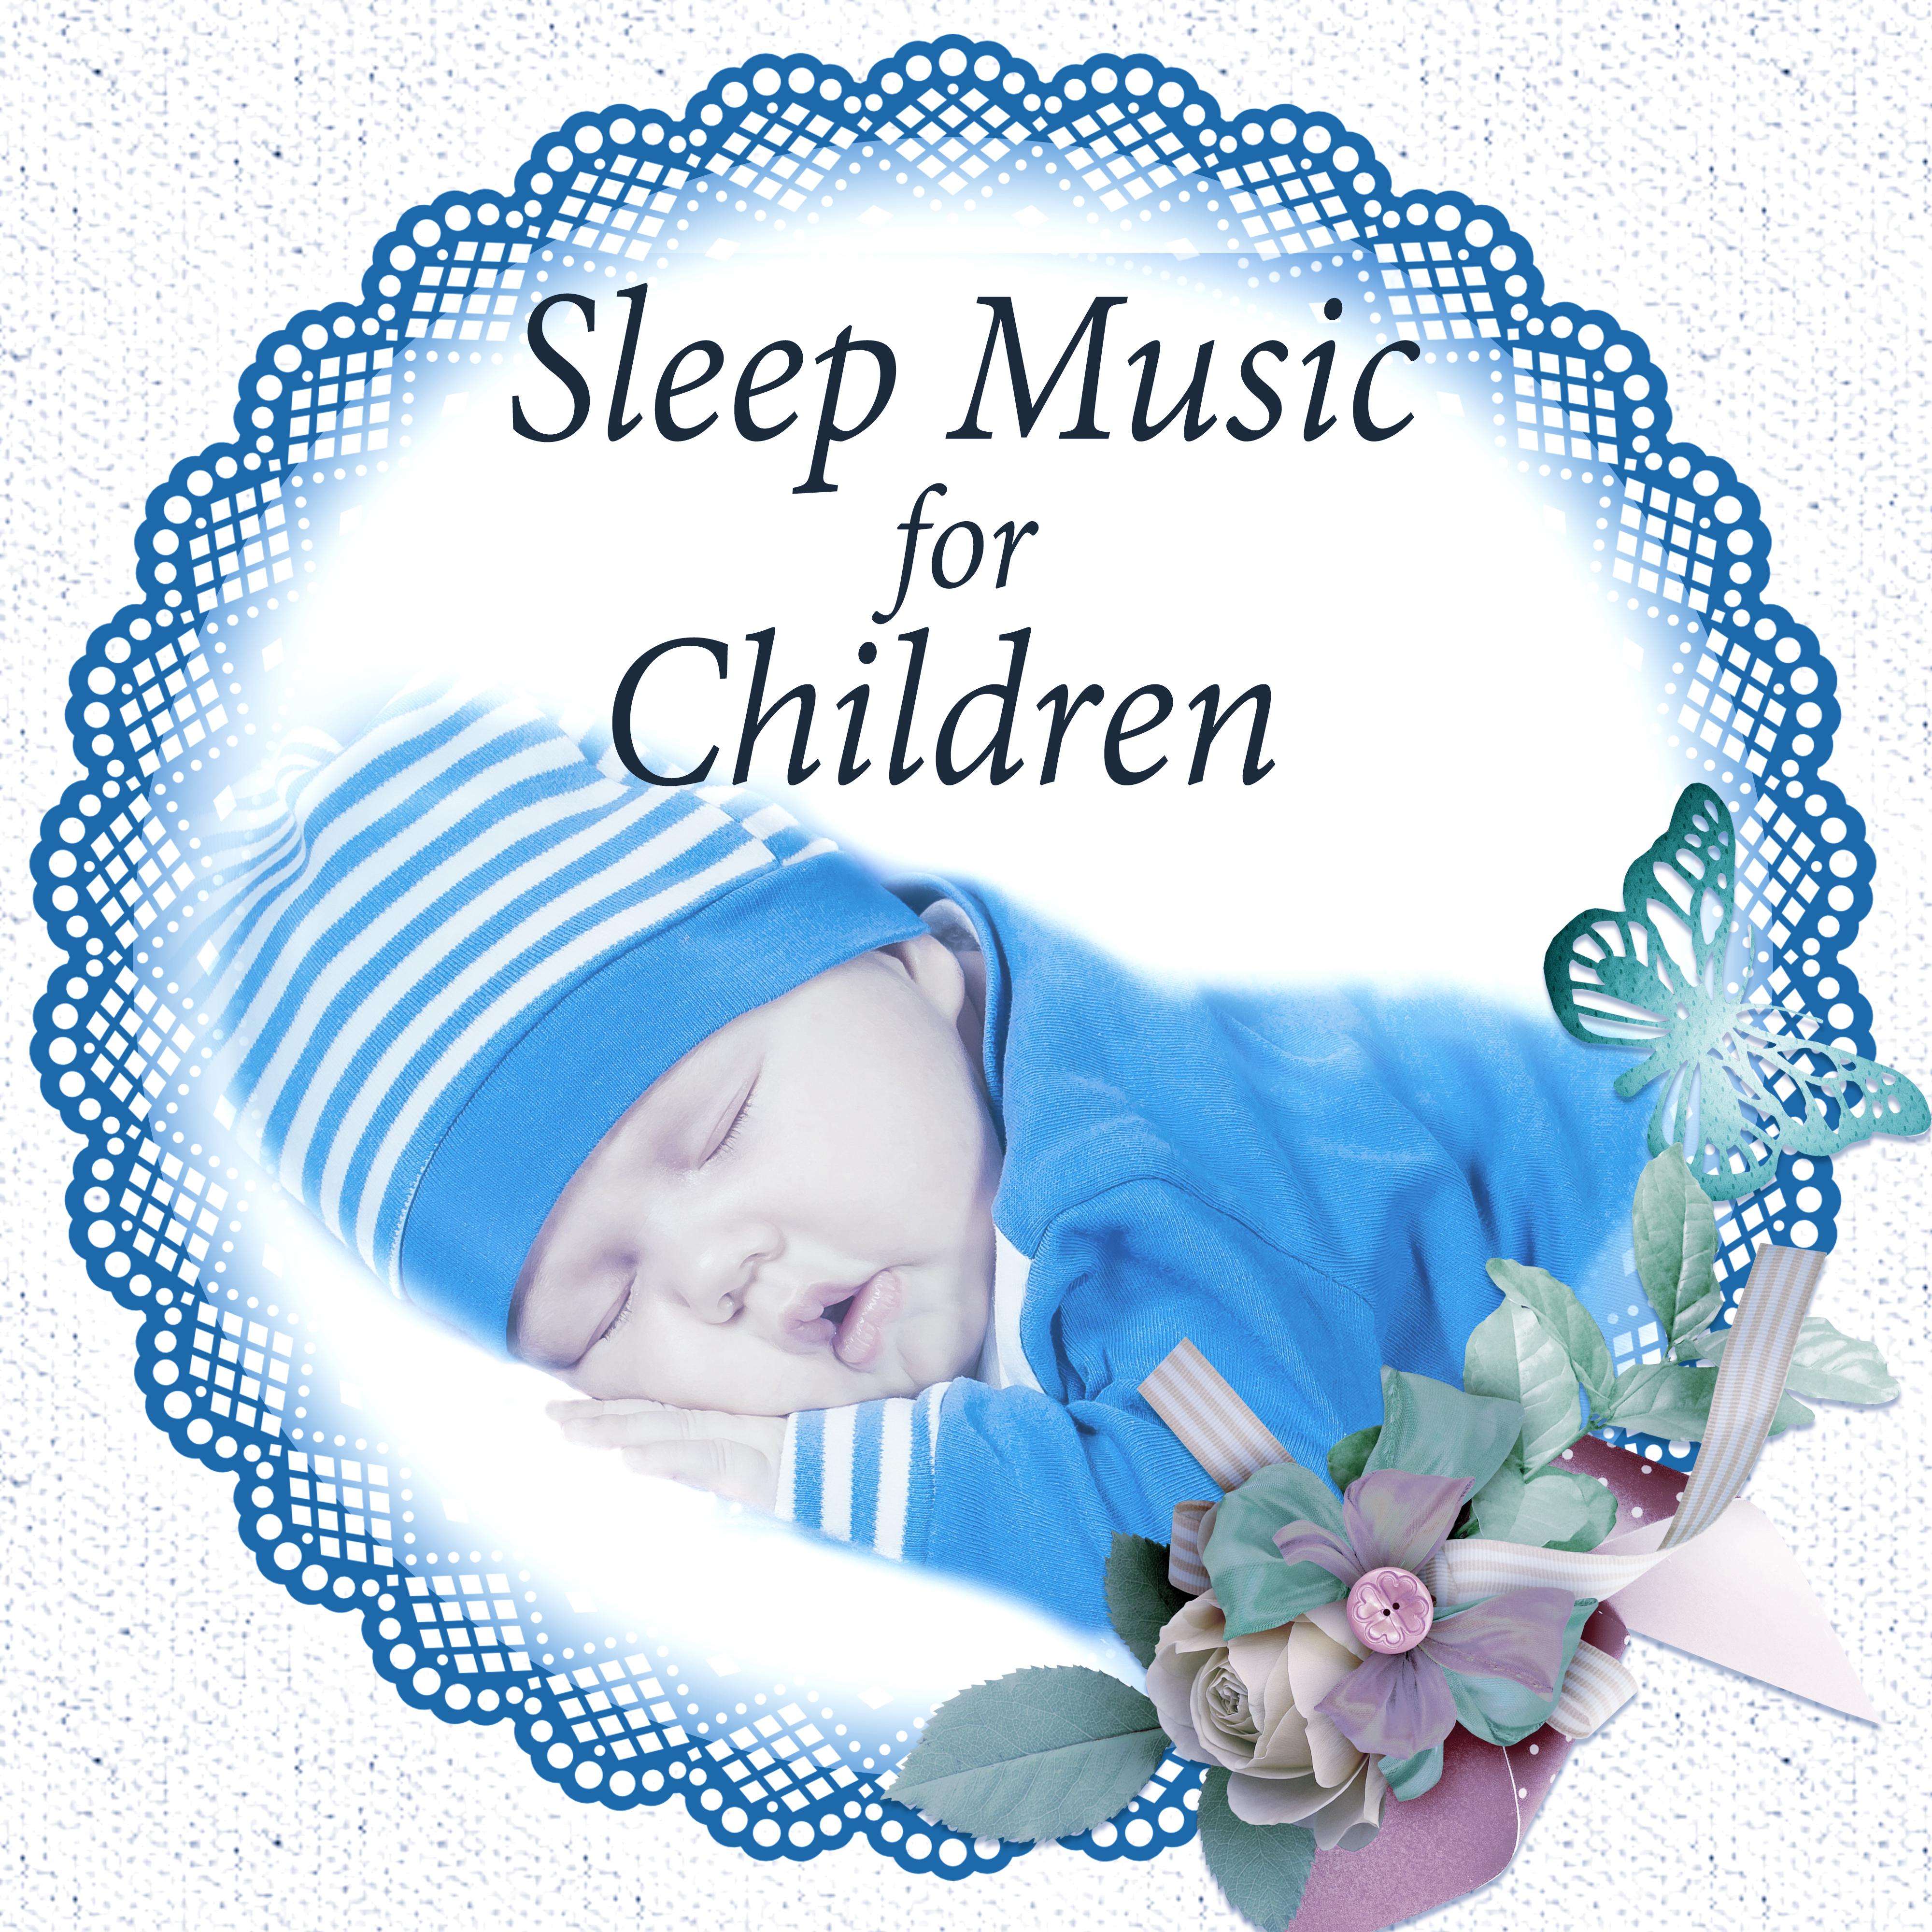 Sleep Music for Children - When the Night falls, Nursery Rhymes and , New Age Sleep Time Song for Newborn, Lullaby